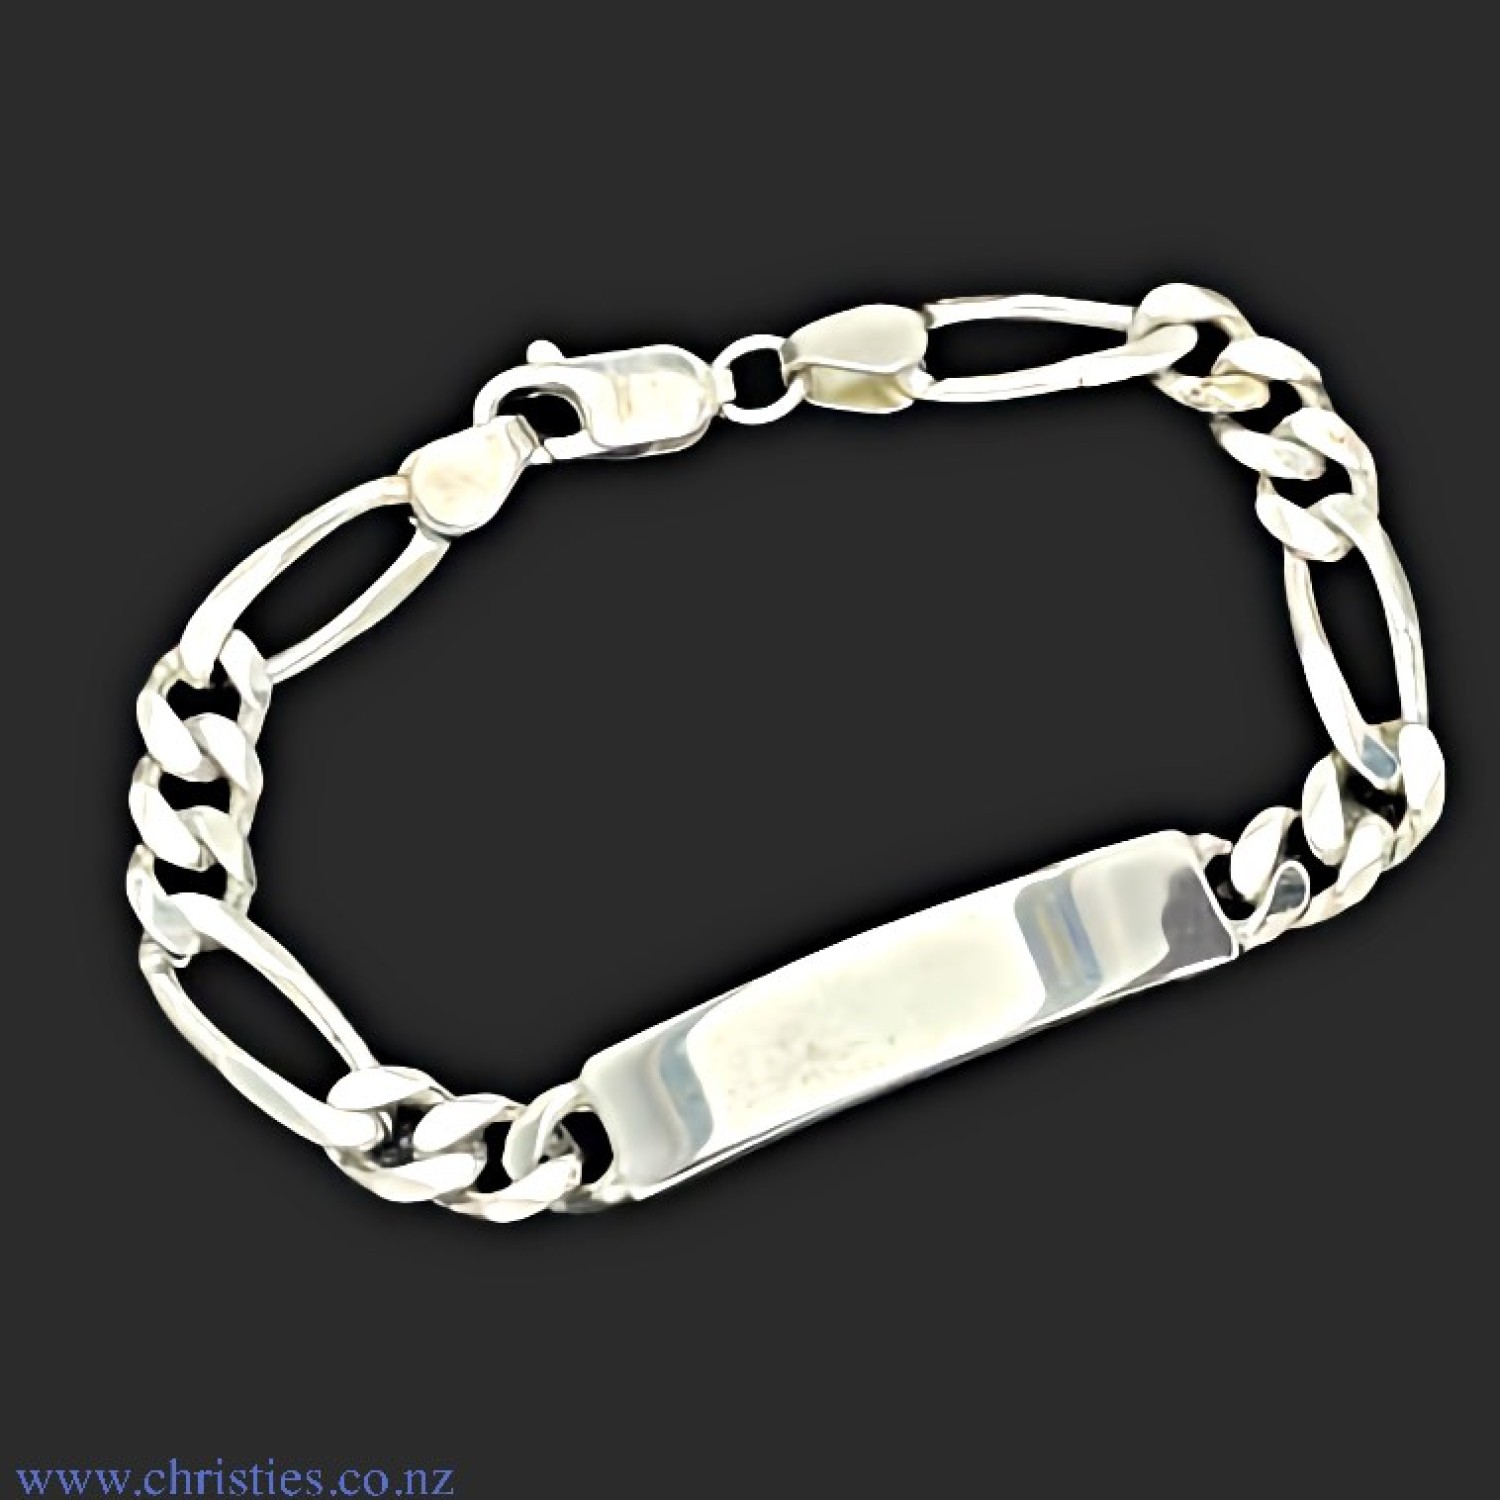 IDFG220H6C20 Sterling Silver ID Figaro Medium Bracelet. Medium weight  Identification bracelet crafted in 925 sterling silver  Afterpay - Split your purchase into 4 instalments - Pay for your purchase over 4 instalments, due every two weeks. You’ll pay @c